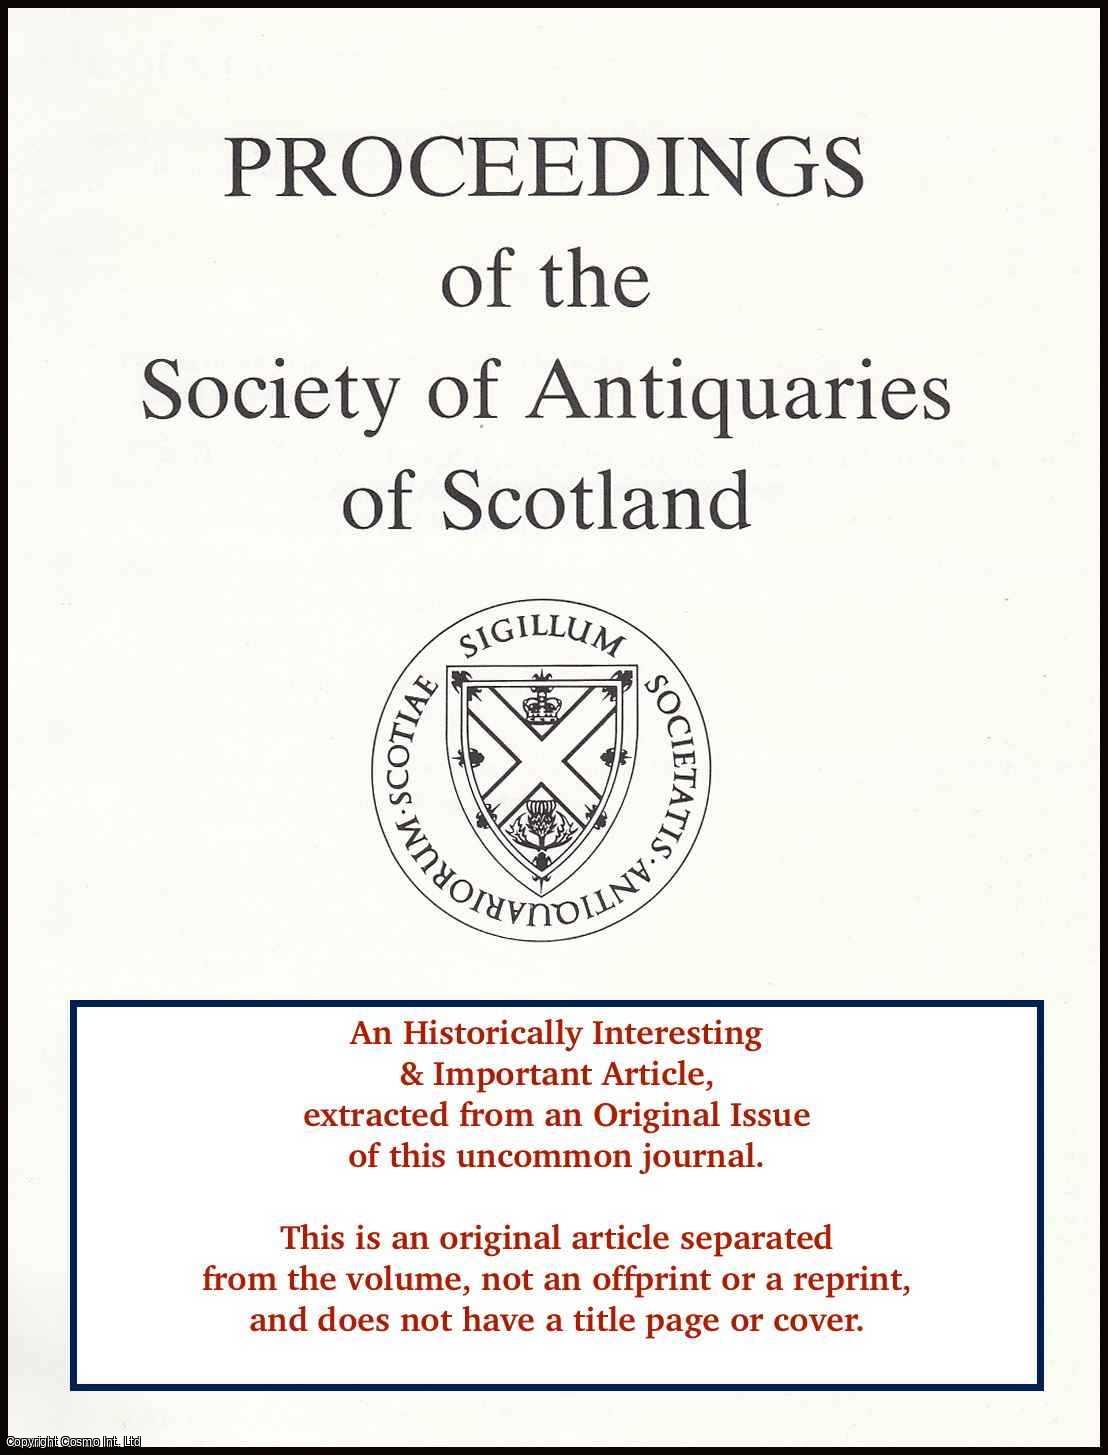 John H. Lewis - The Charcoal-Fired Blast Furnaces of Scotland: A Review. An original article from the Society of Antiquaries of Scotland, 1984.